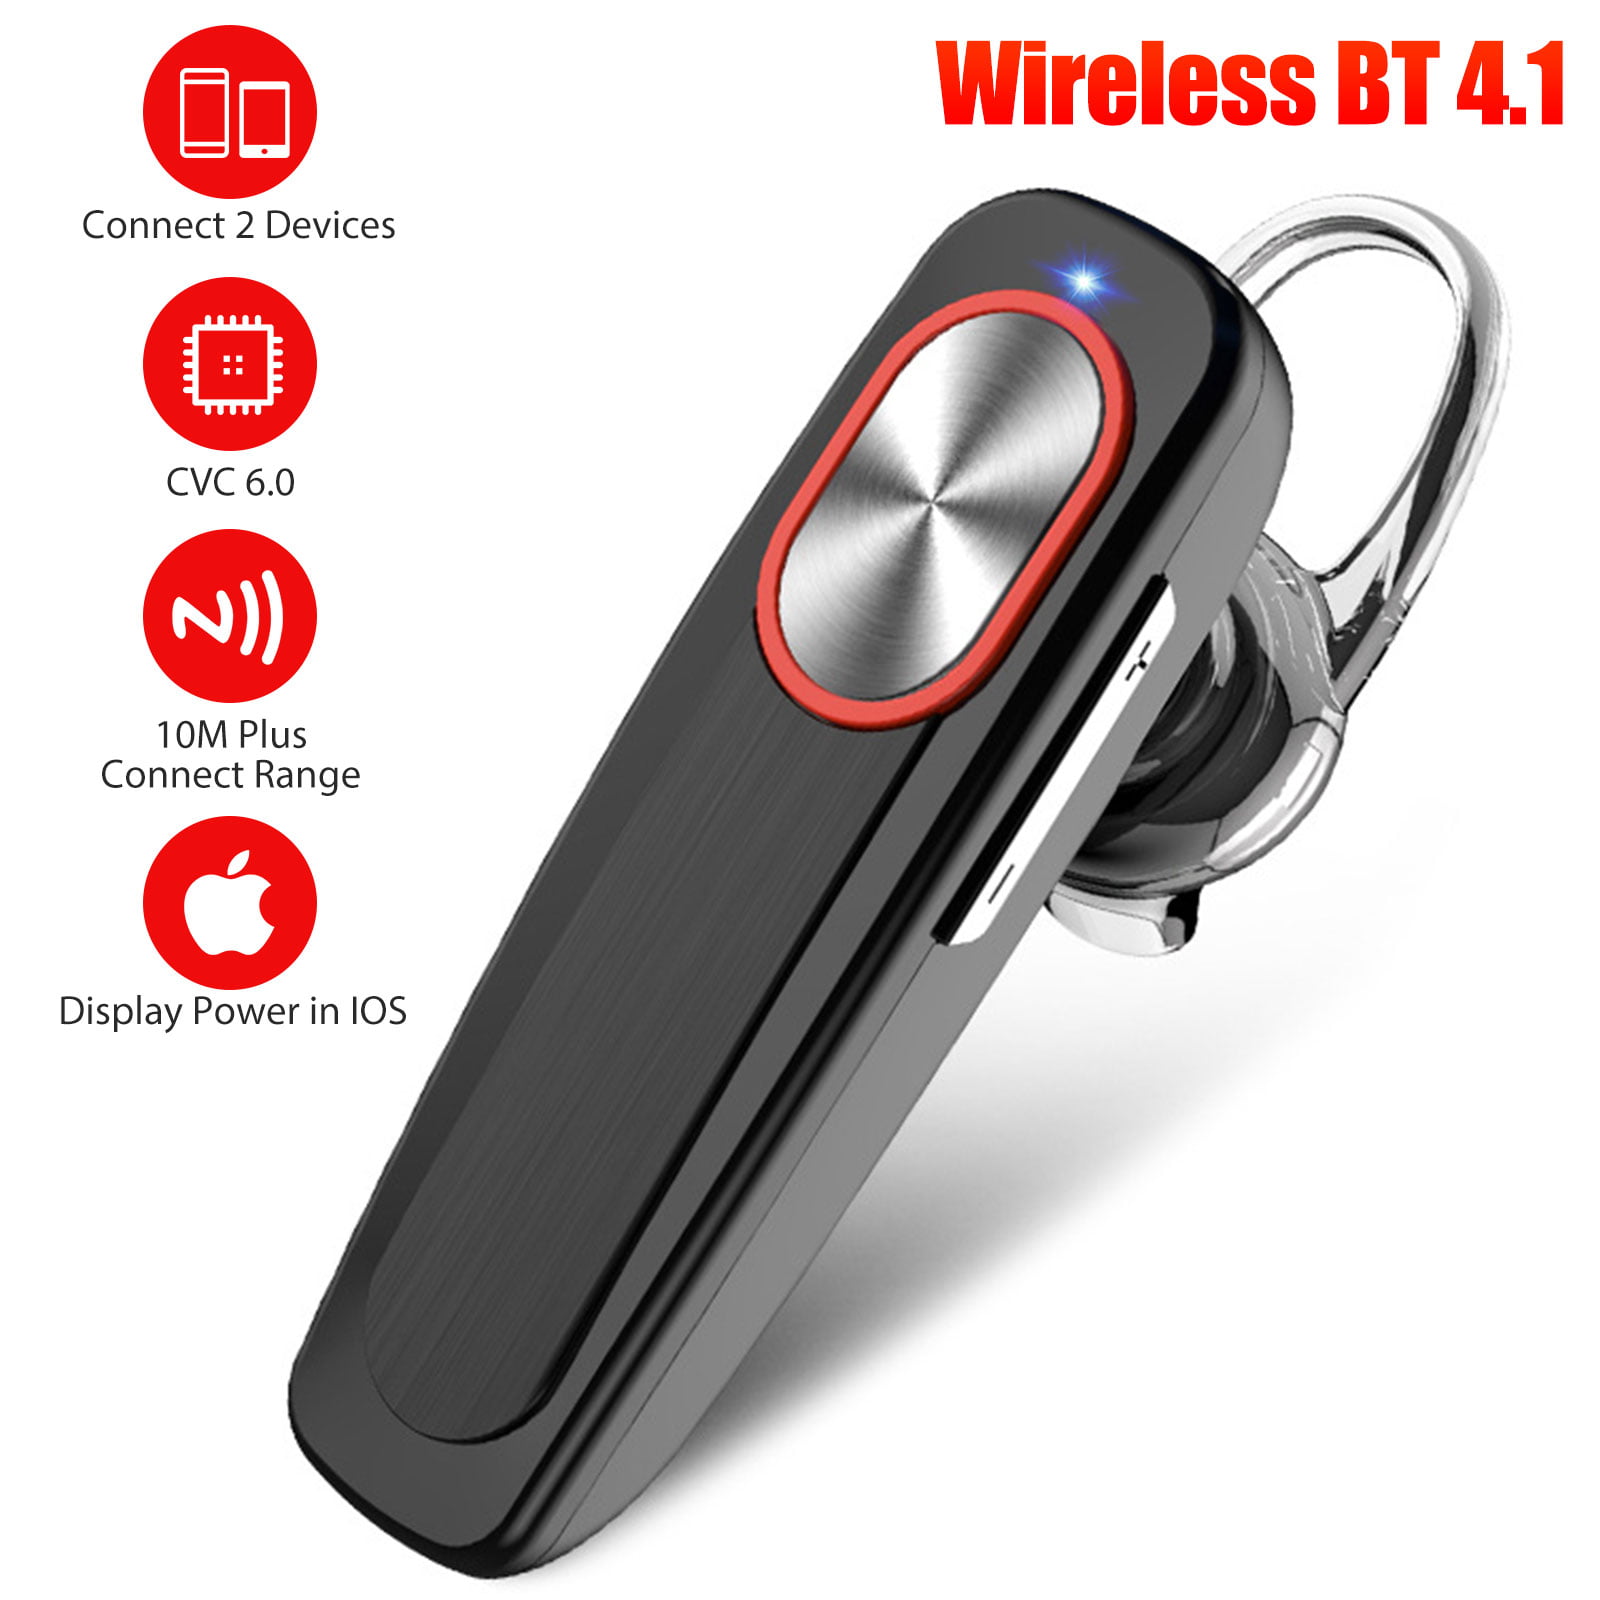 EEEKit Bluetooth Earpiece Wireless Cell Phones Headset with Mic Noise Cancelling Hands Free Earbud Car Driving Headphones Compatible with iPhone Android All Smart Cell Phone (36 Hours Talk Time)